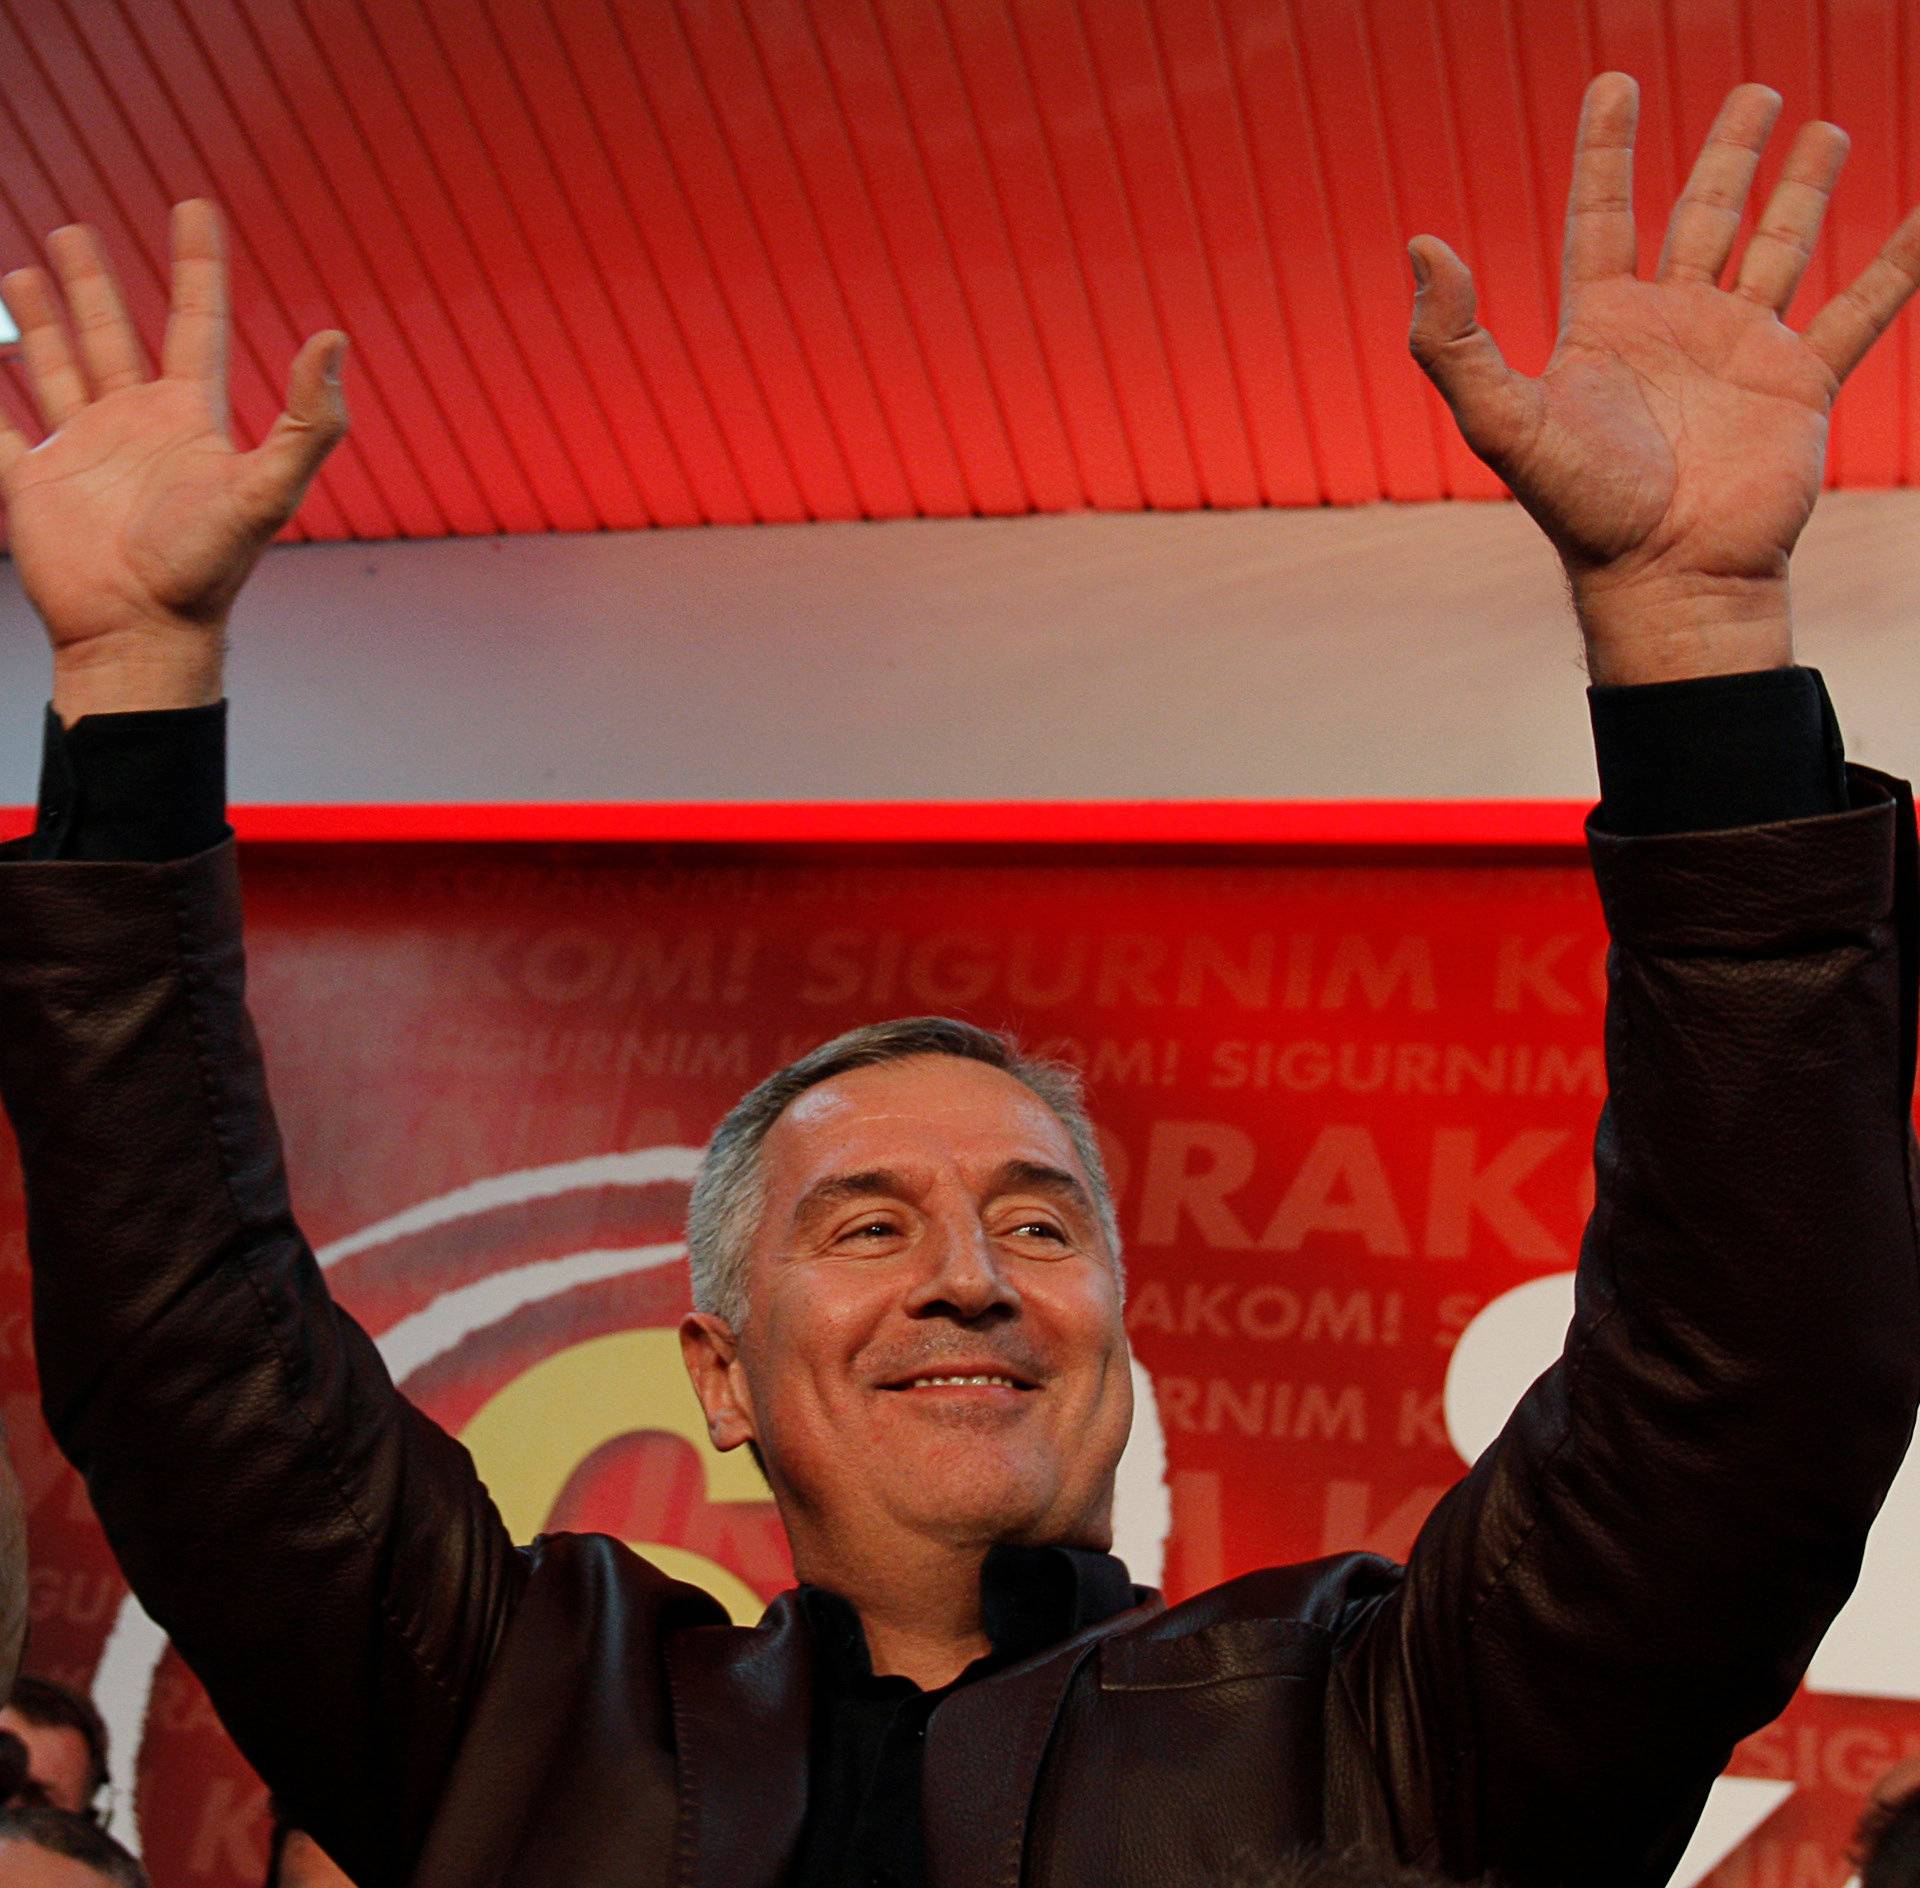 Montenegrin Prime Minister and leader of ruling Democratic Party of Socialist Milo Djukanovic wave to supporters after the parliamentary elections in Podgorica